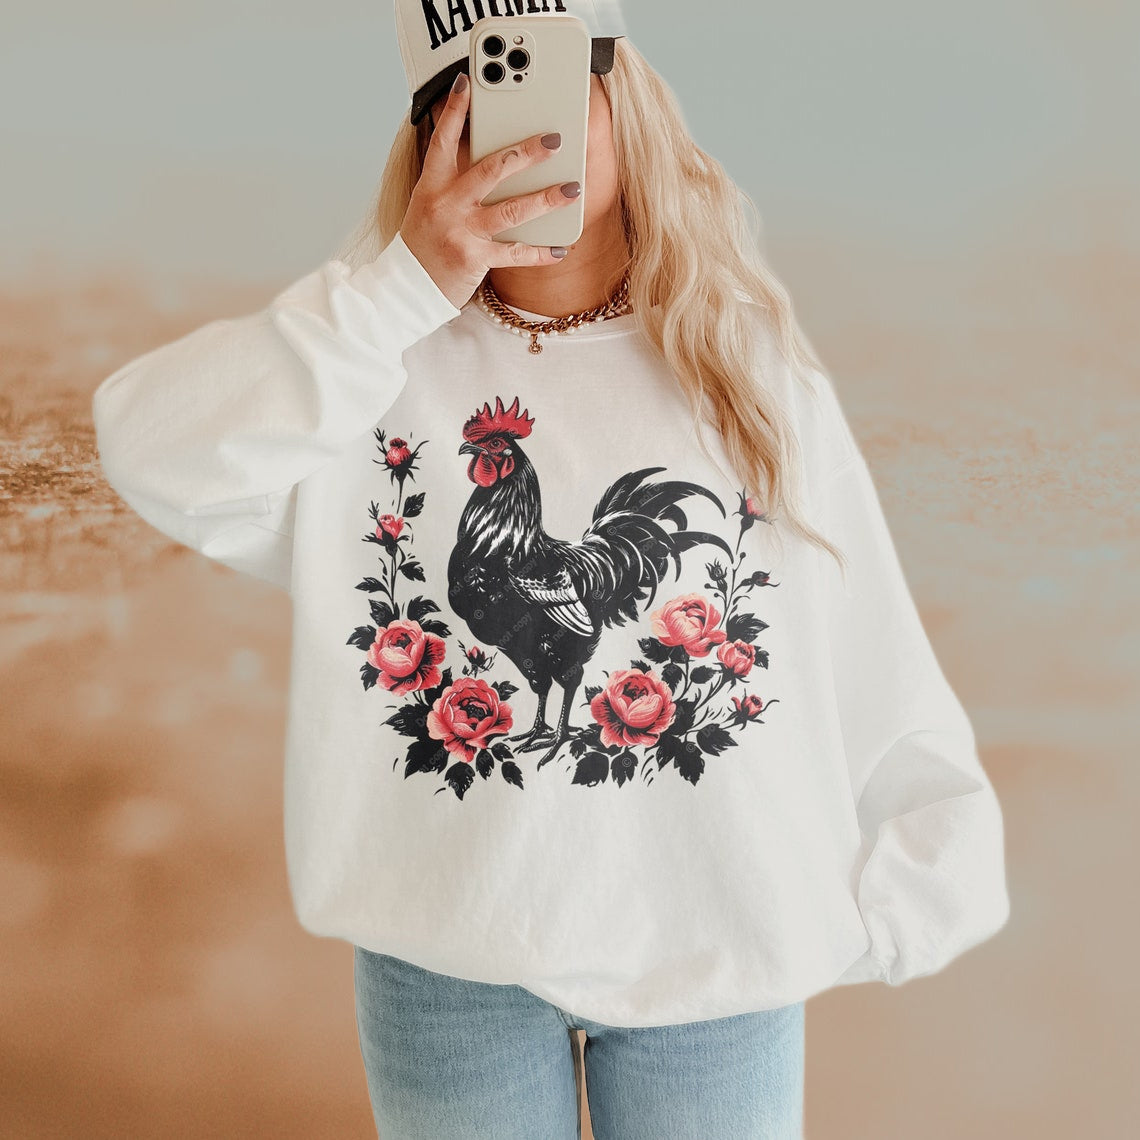 T-Shirt Or Sweatshirt Country Rooster  Roses - Flowers Rustic